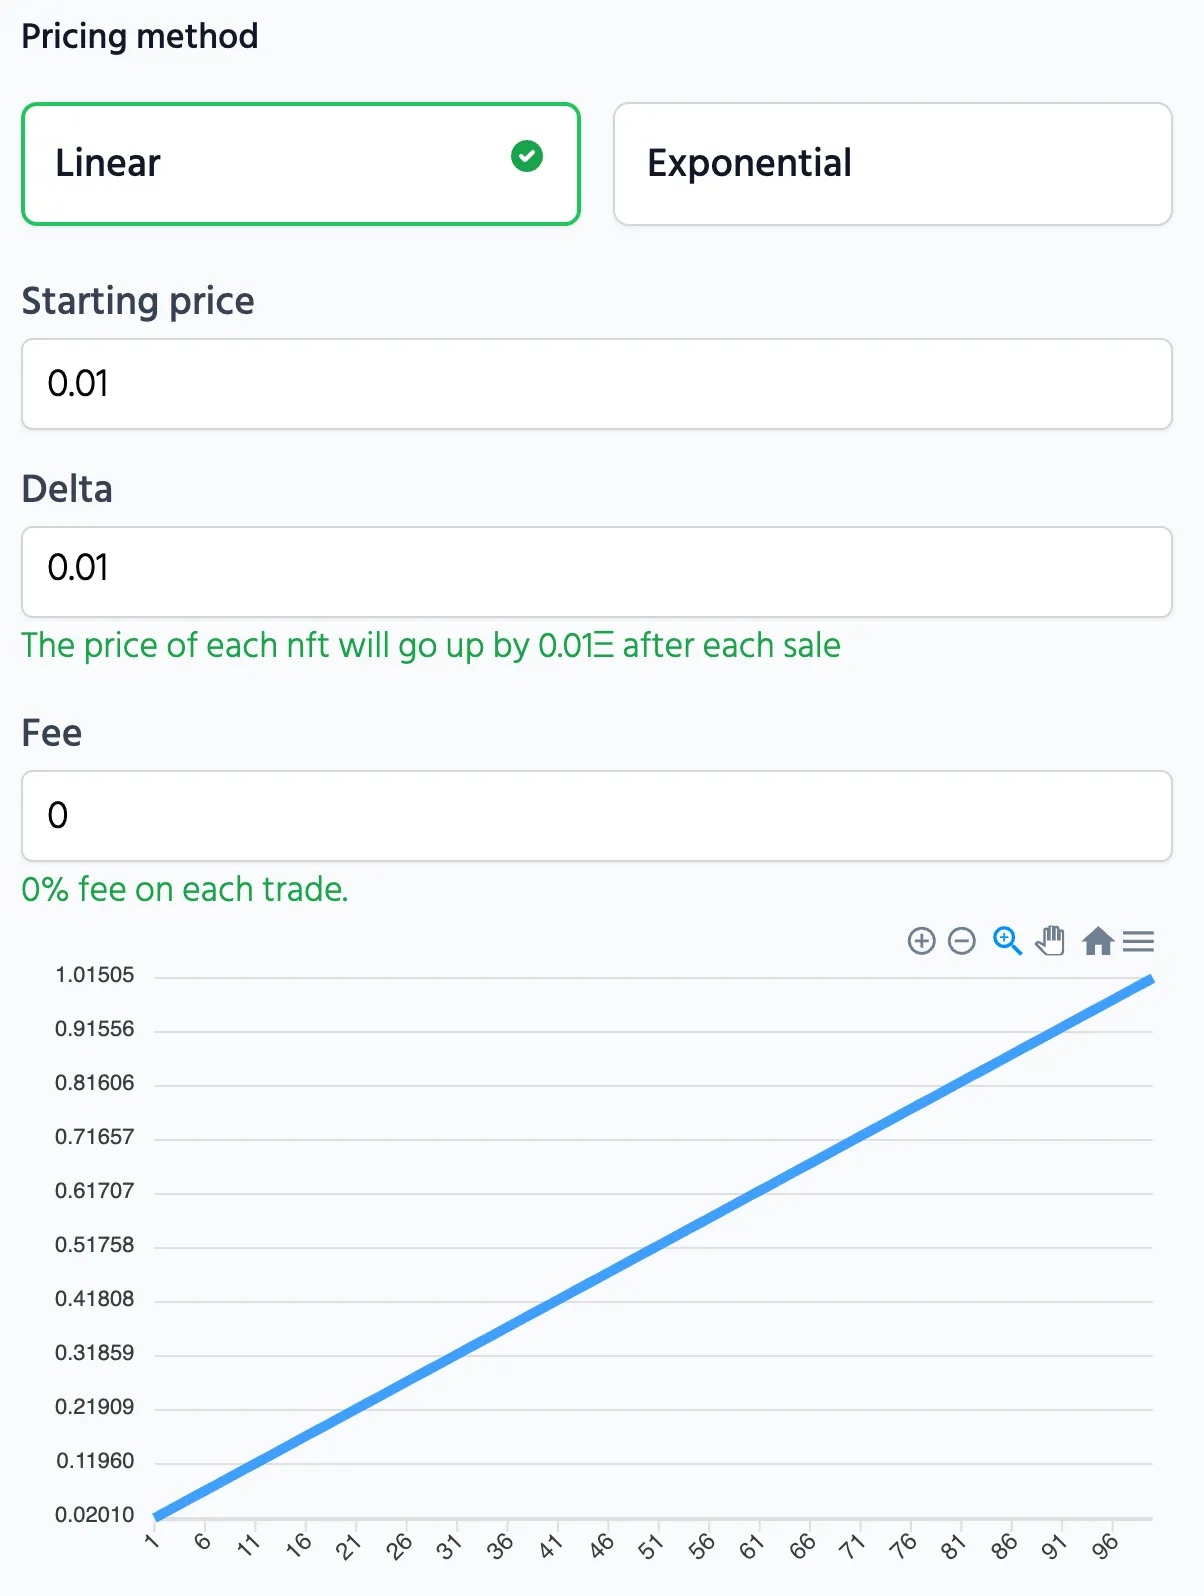 Setting the pricing details